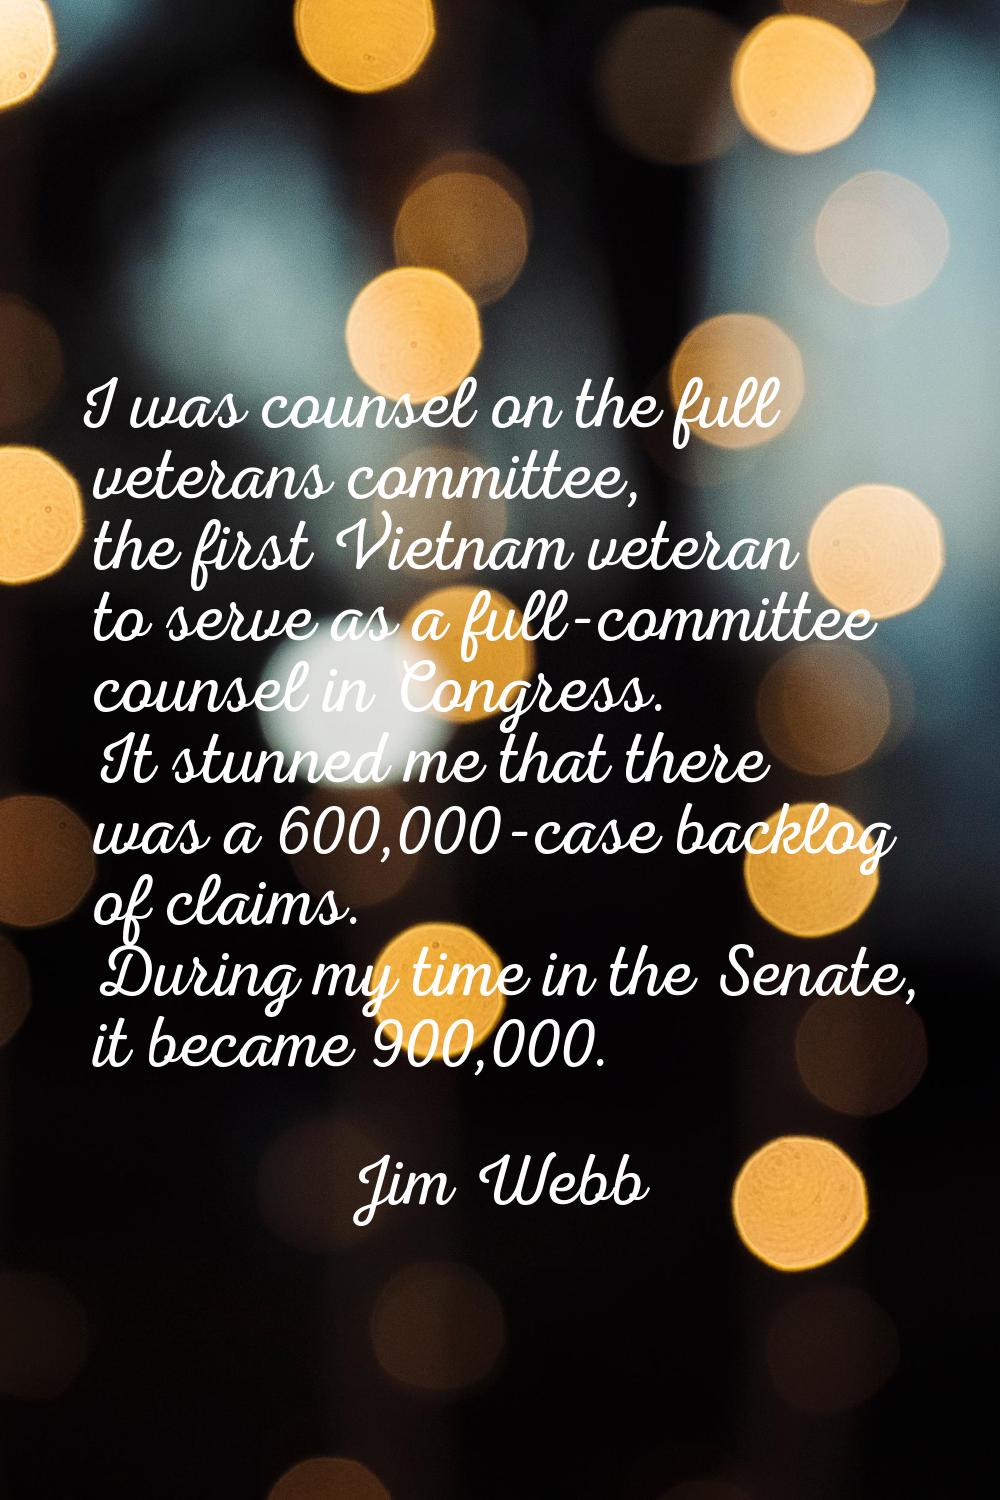 I was counsel on the full veterans committee, the first Vietnam veteran to serve as a full-committe